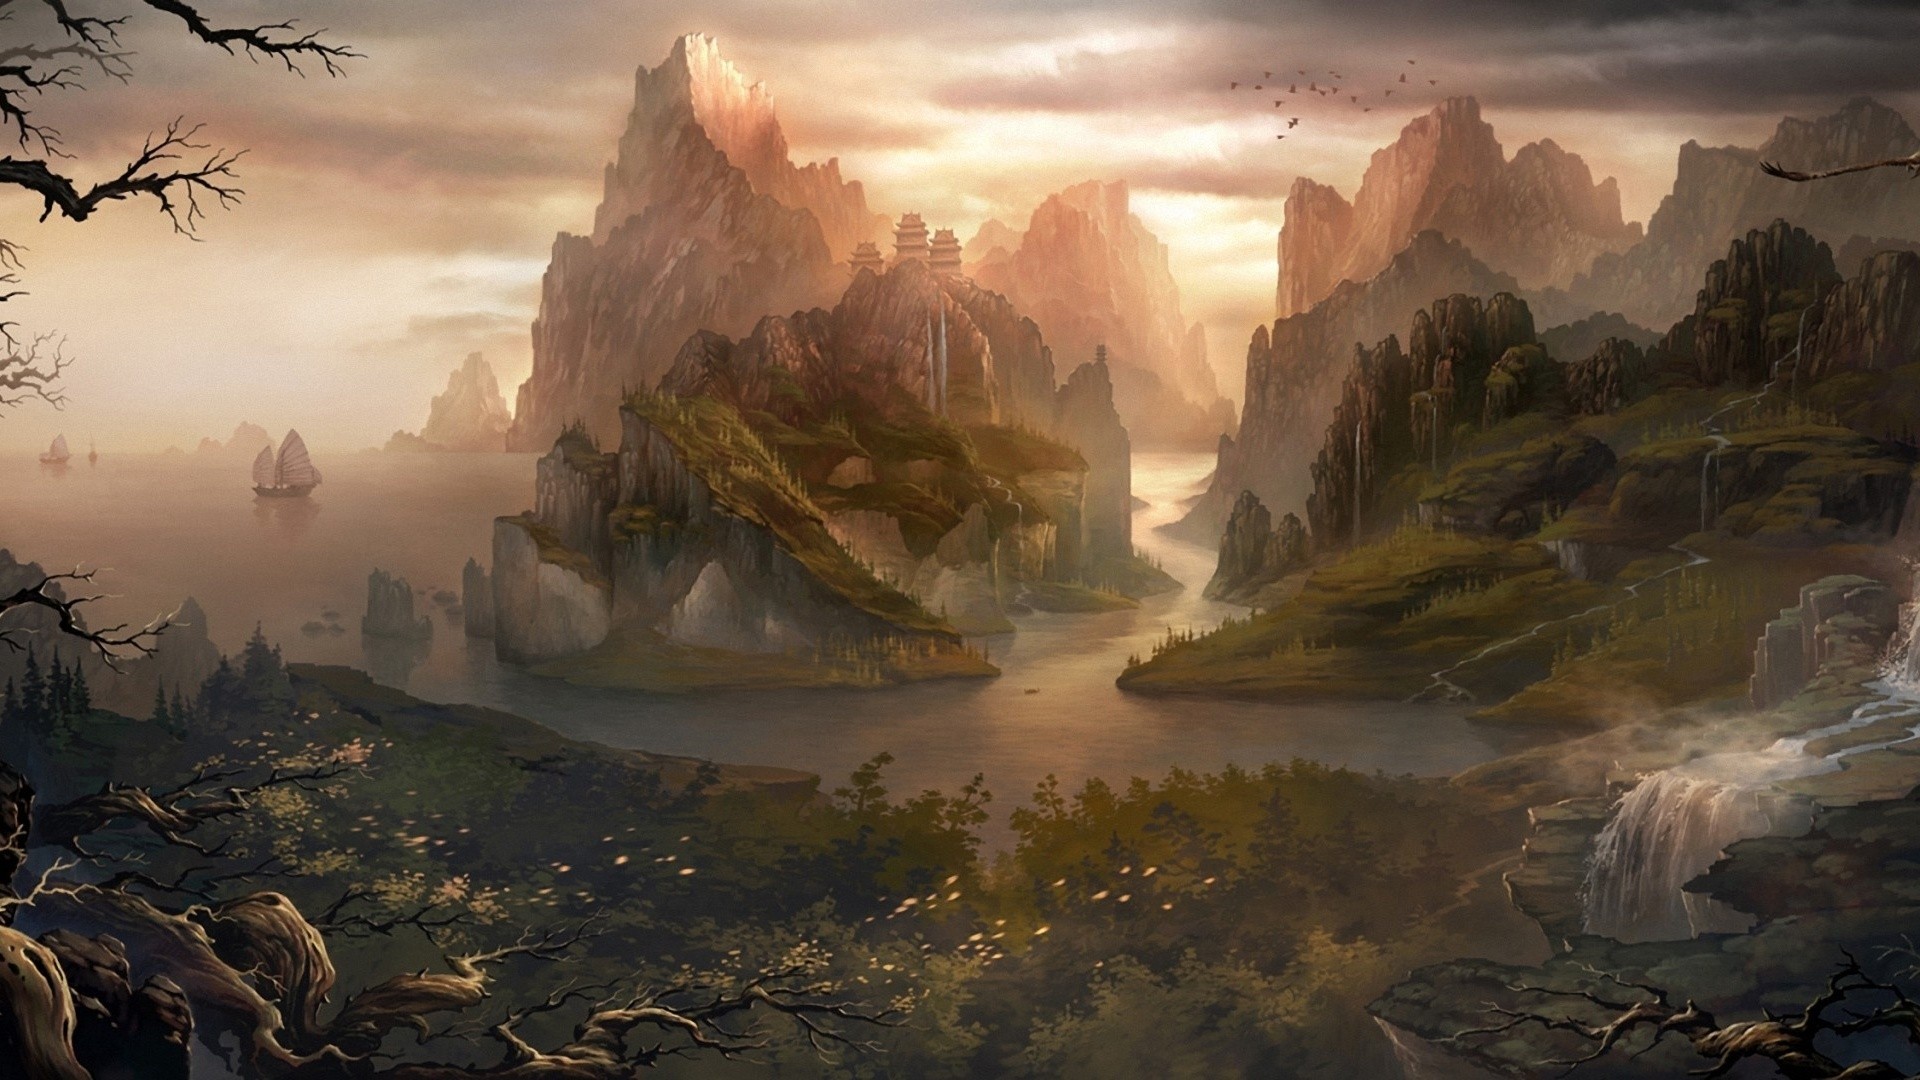 General 1920x1080 digital art fantasy art nature landscape water rock hills mountains island sailing ship trees waterfall birds Chinese architecture